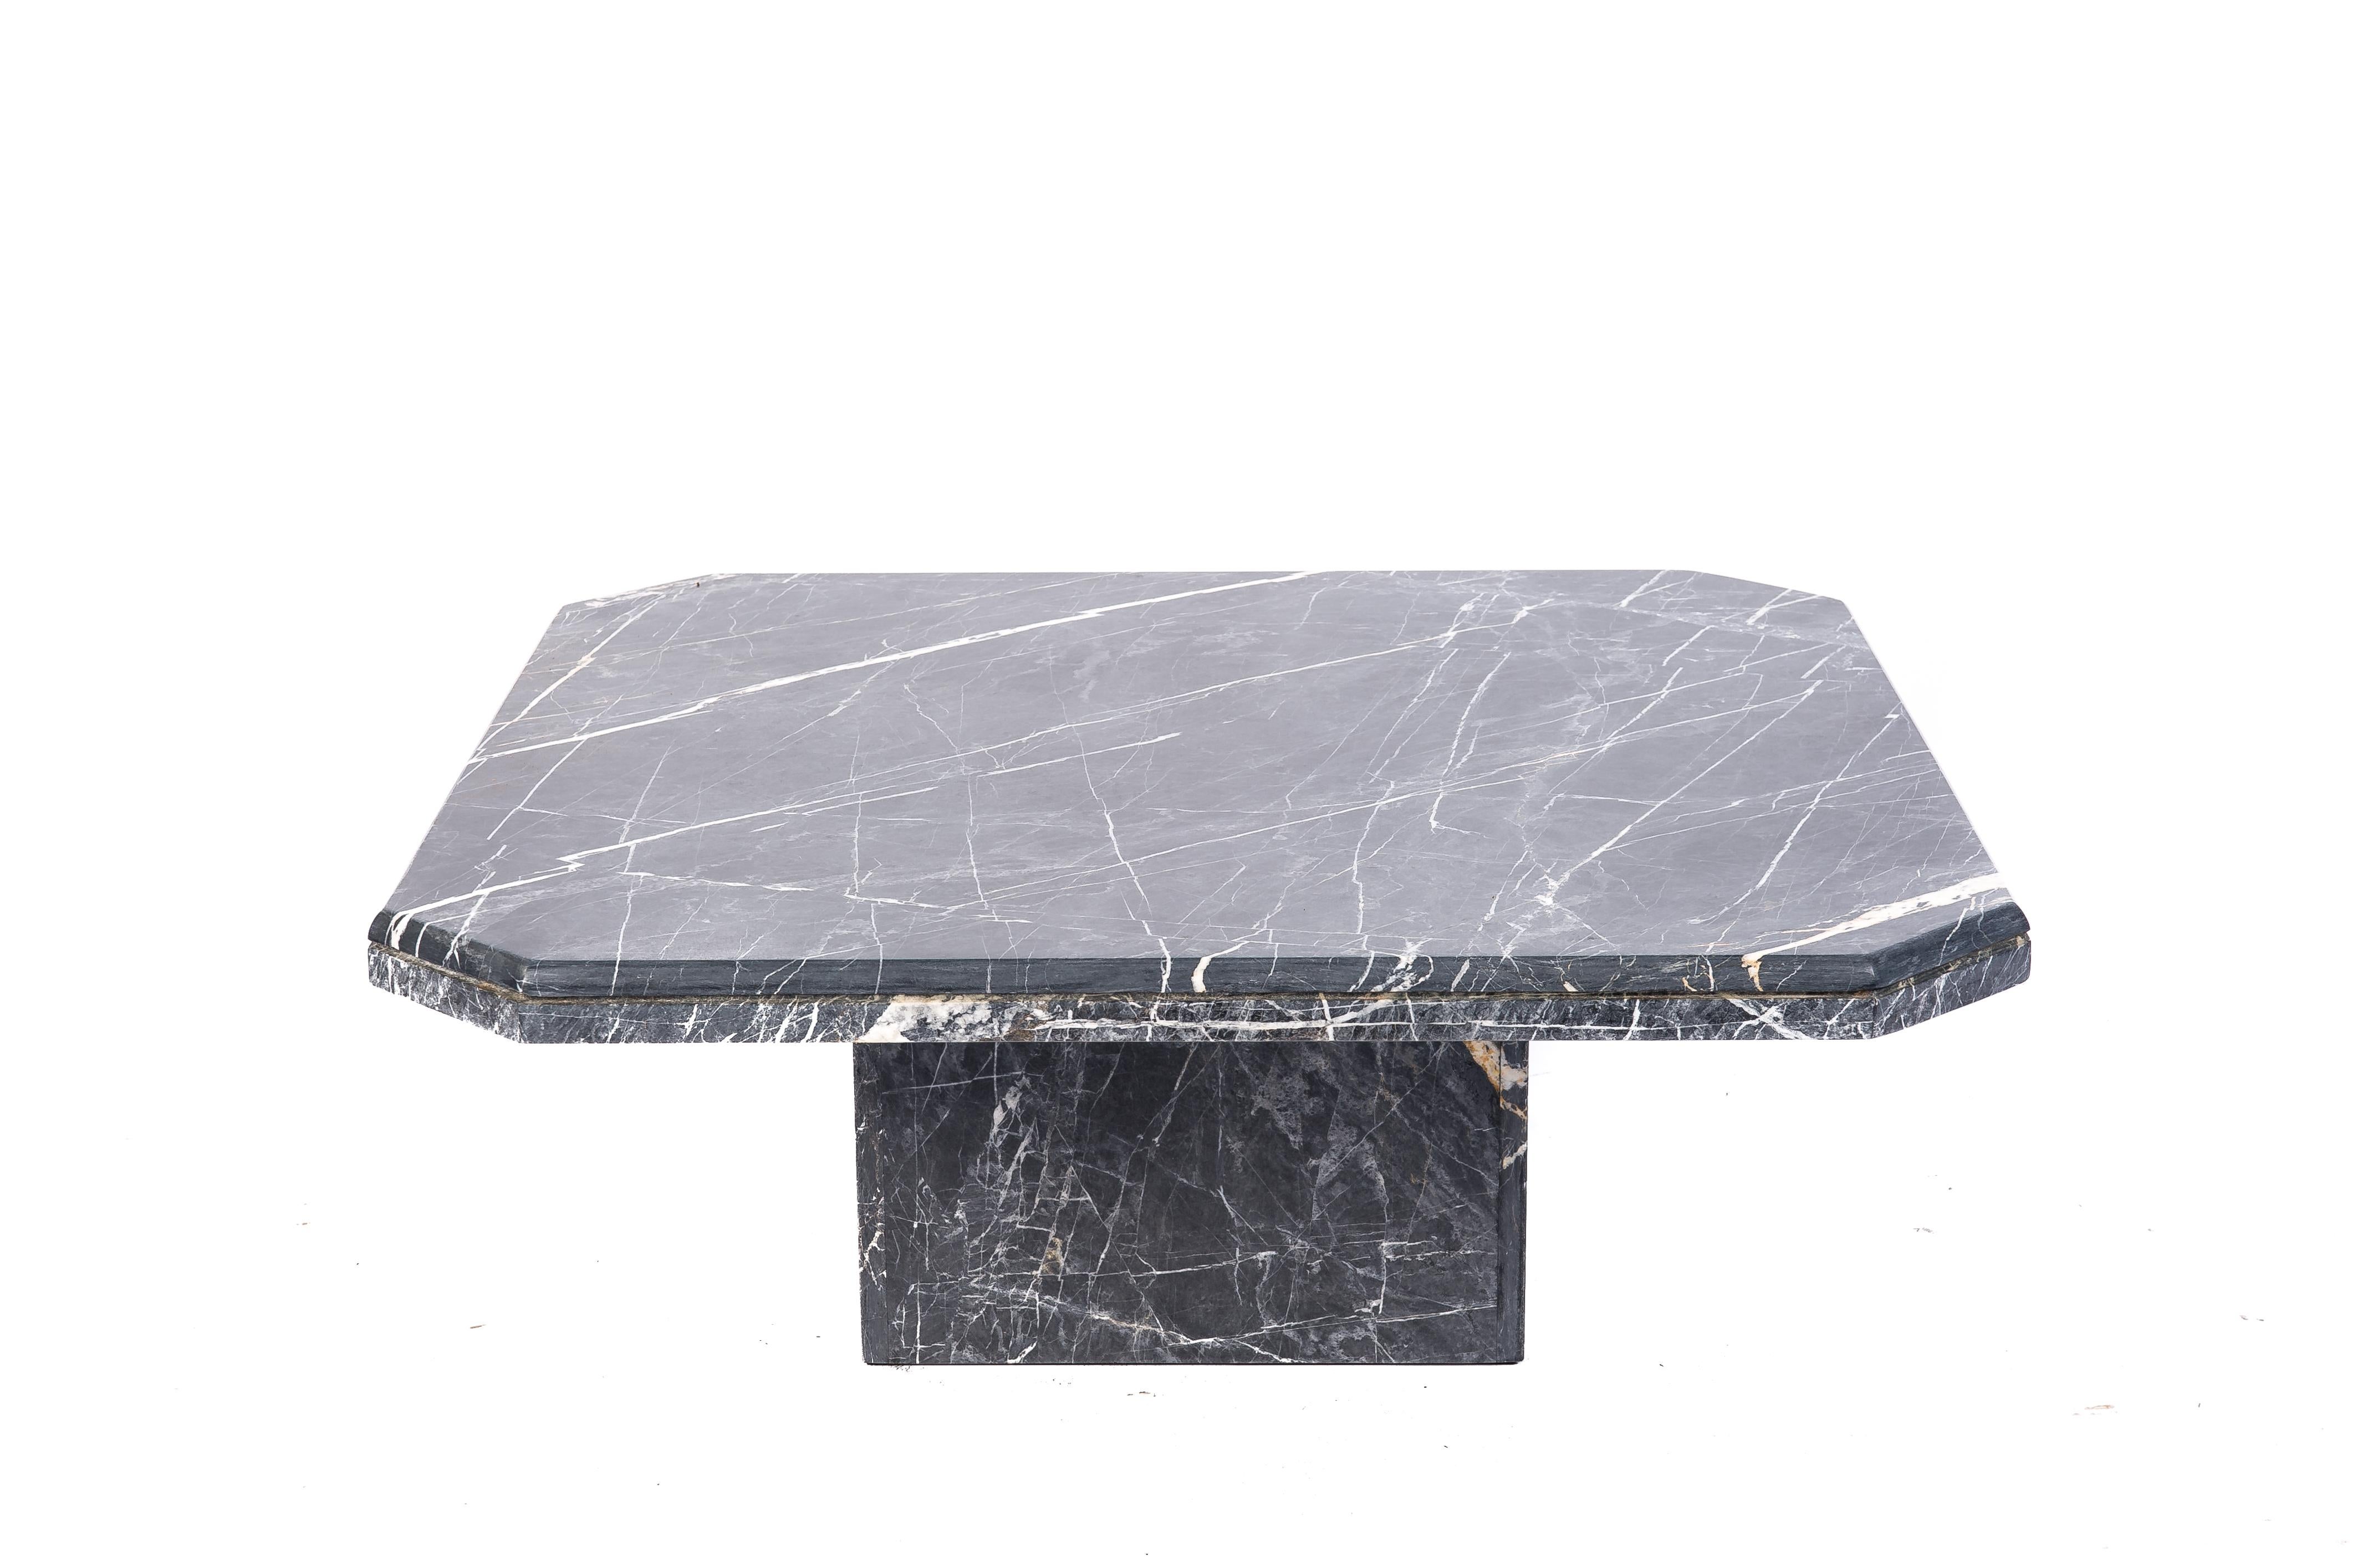 This beautiful marble coffee table was completely made in Noir saint Laurent black marble. It was made in France circa 1970. It has a square top with chamfered corners and a molded edge. It rests on a simple square marble base. The whole table was